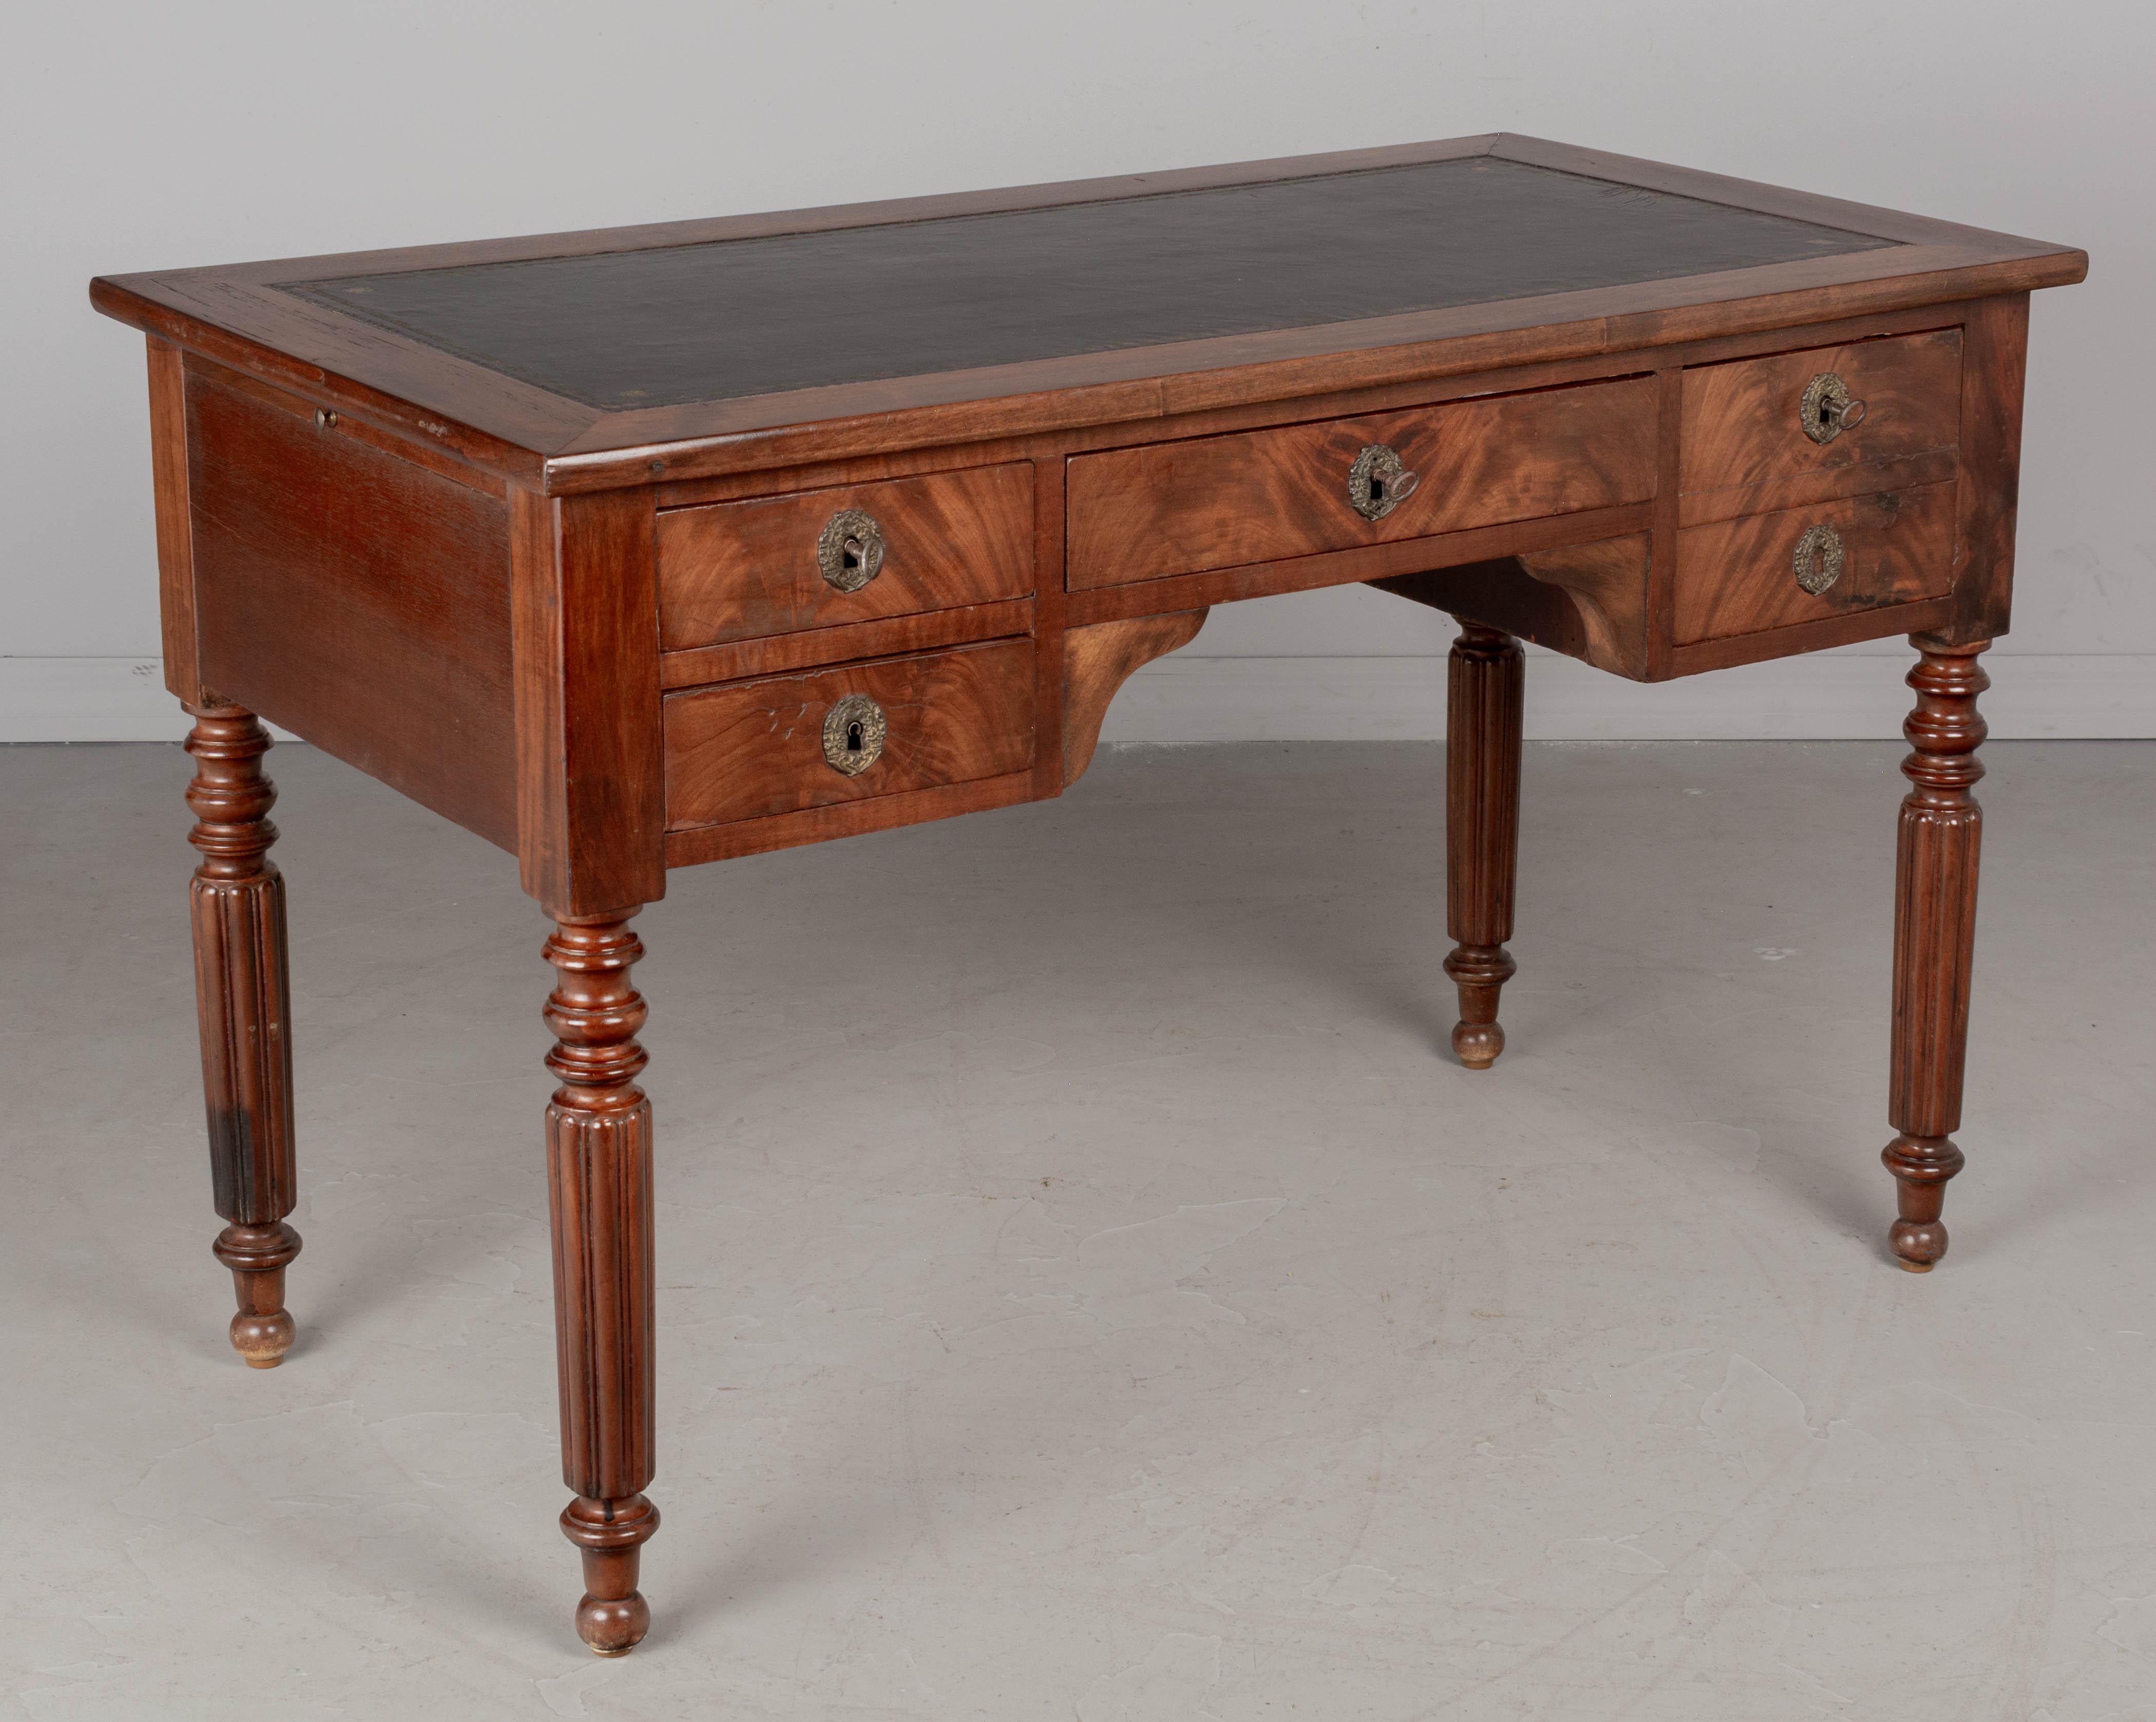 A French Louis Philippe style bureau plat, or desk made of solid and veneer of mahogany. Double sided, the back has false drawers so this desk may be free floated in a room. Four dovetailed drawers with brass escutcheons, working locks and three